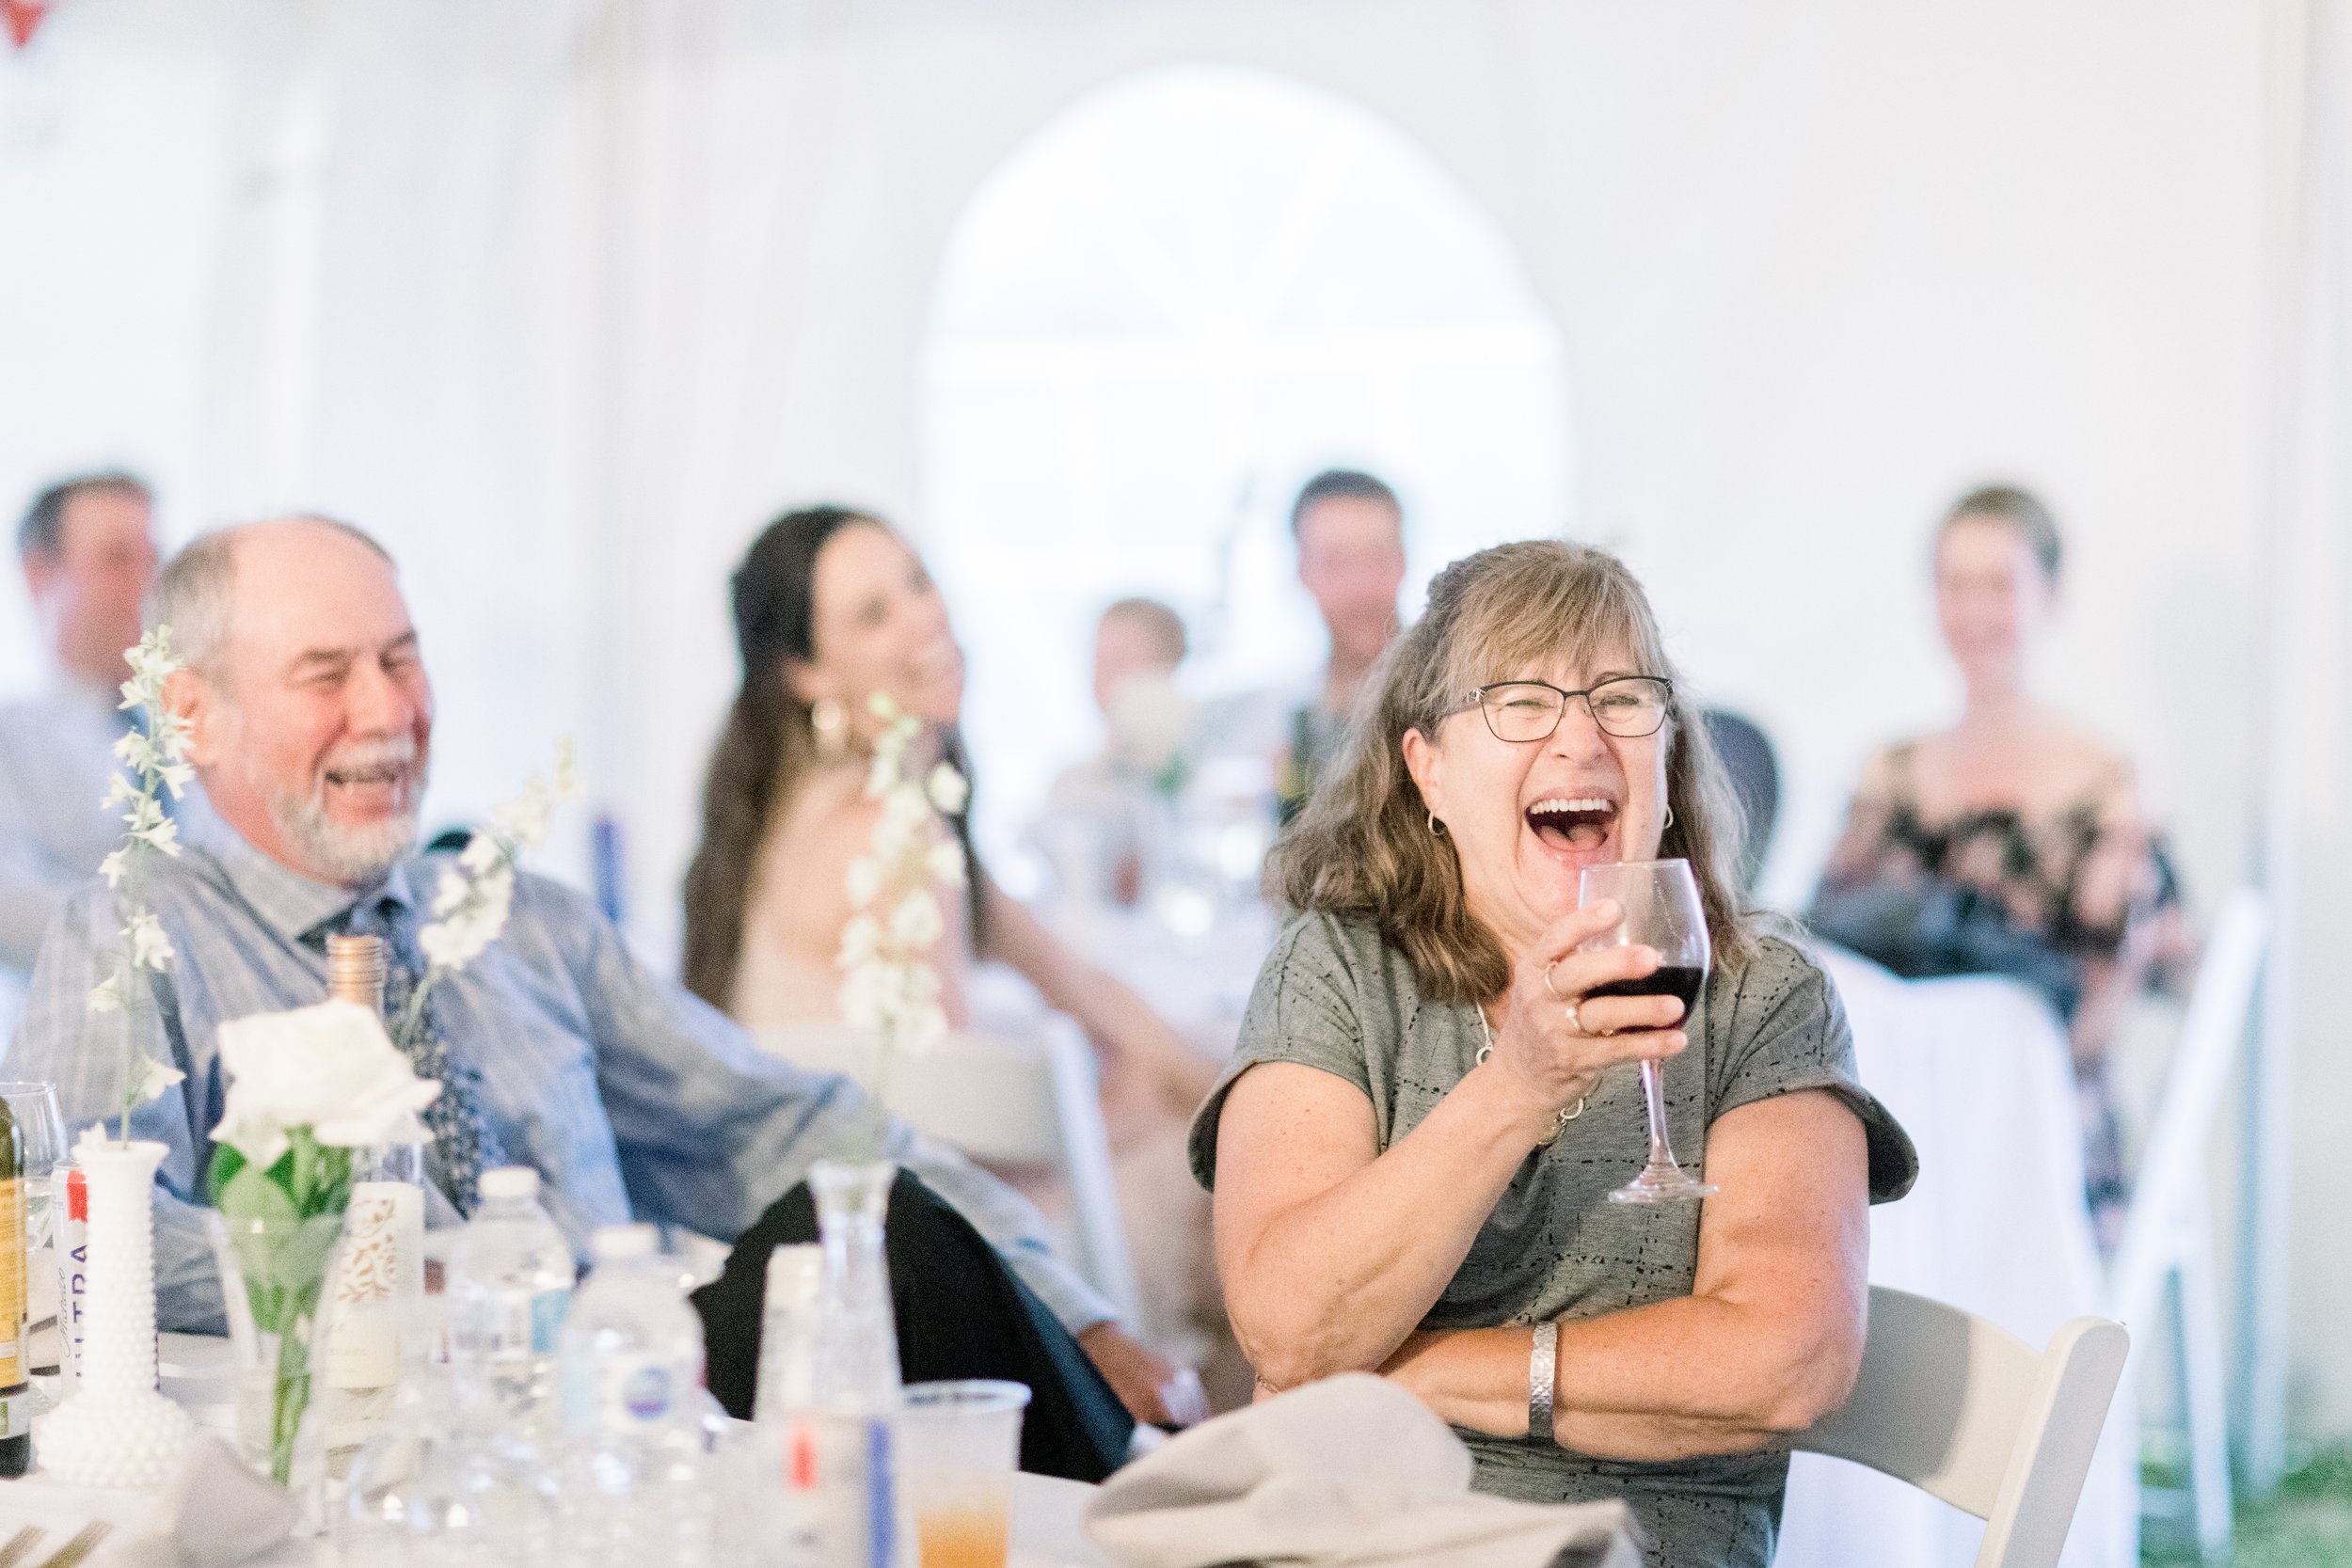  During a wedding in Boulter, Ontario Chelsea Mason Photography captures wedding guests toasting. wedding guest portraits Boulter weddings #chelseamasonphotography #chelseamasonweddings #Ontarioweddings #Boulterweddingphotographer #laceweddinggown 